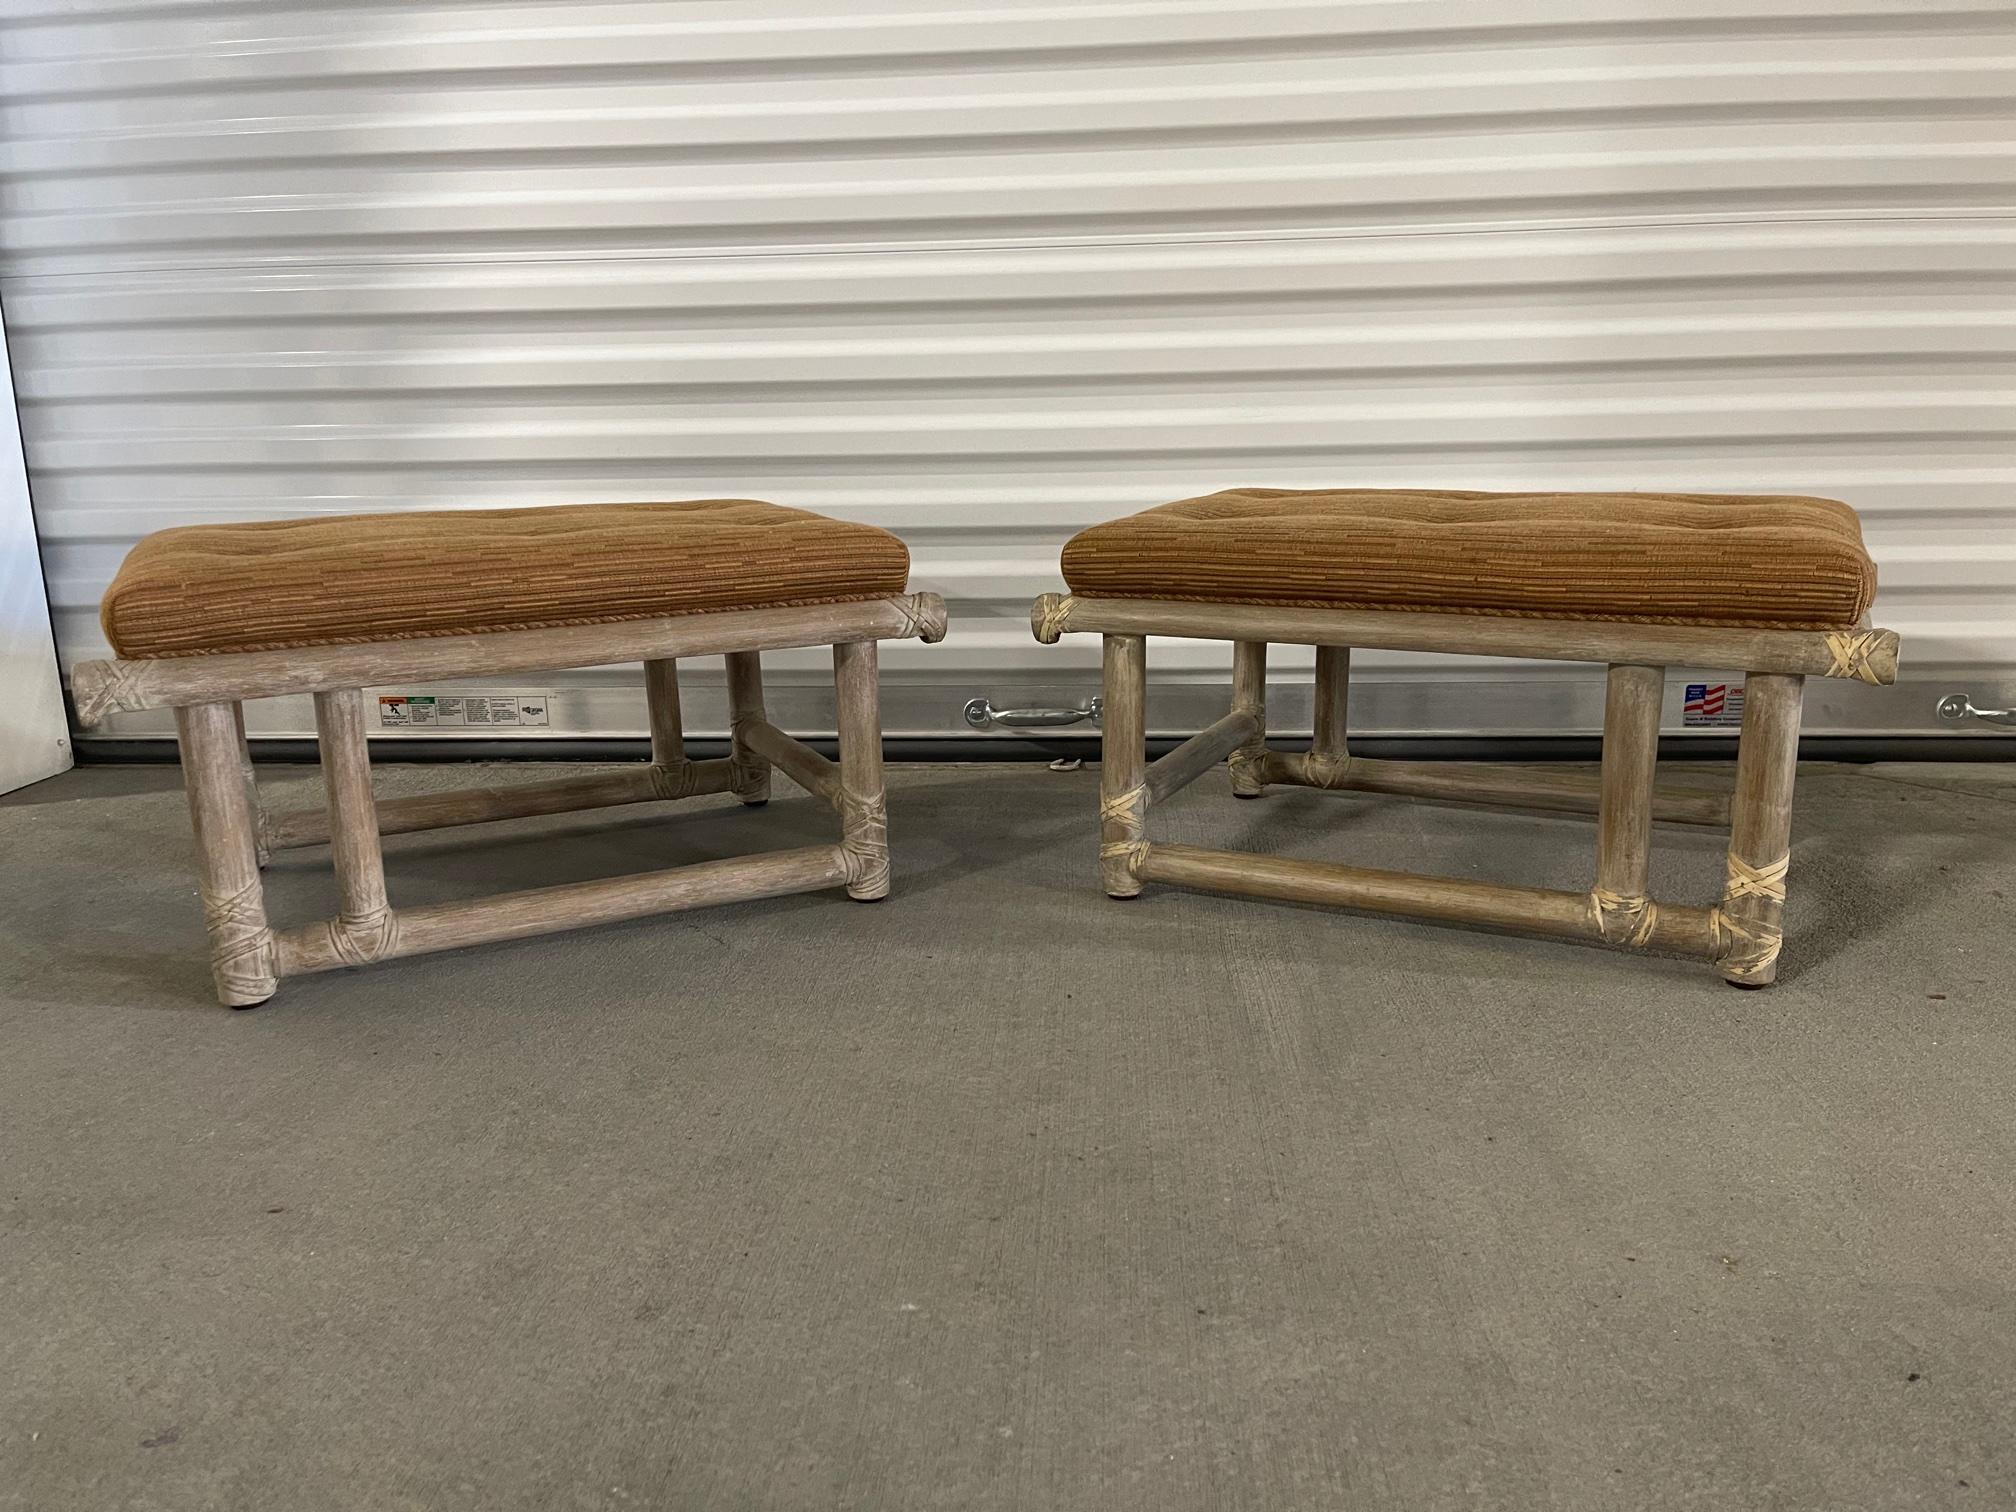 Pair of mid-century lacquered bamboo ottomans or foot stools featuring a Cerused or whitewashed finish with woven leather straps and stretchers. Signed McGuire on a brass label.
   